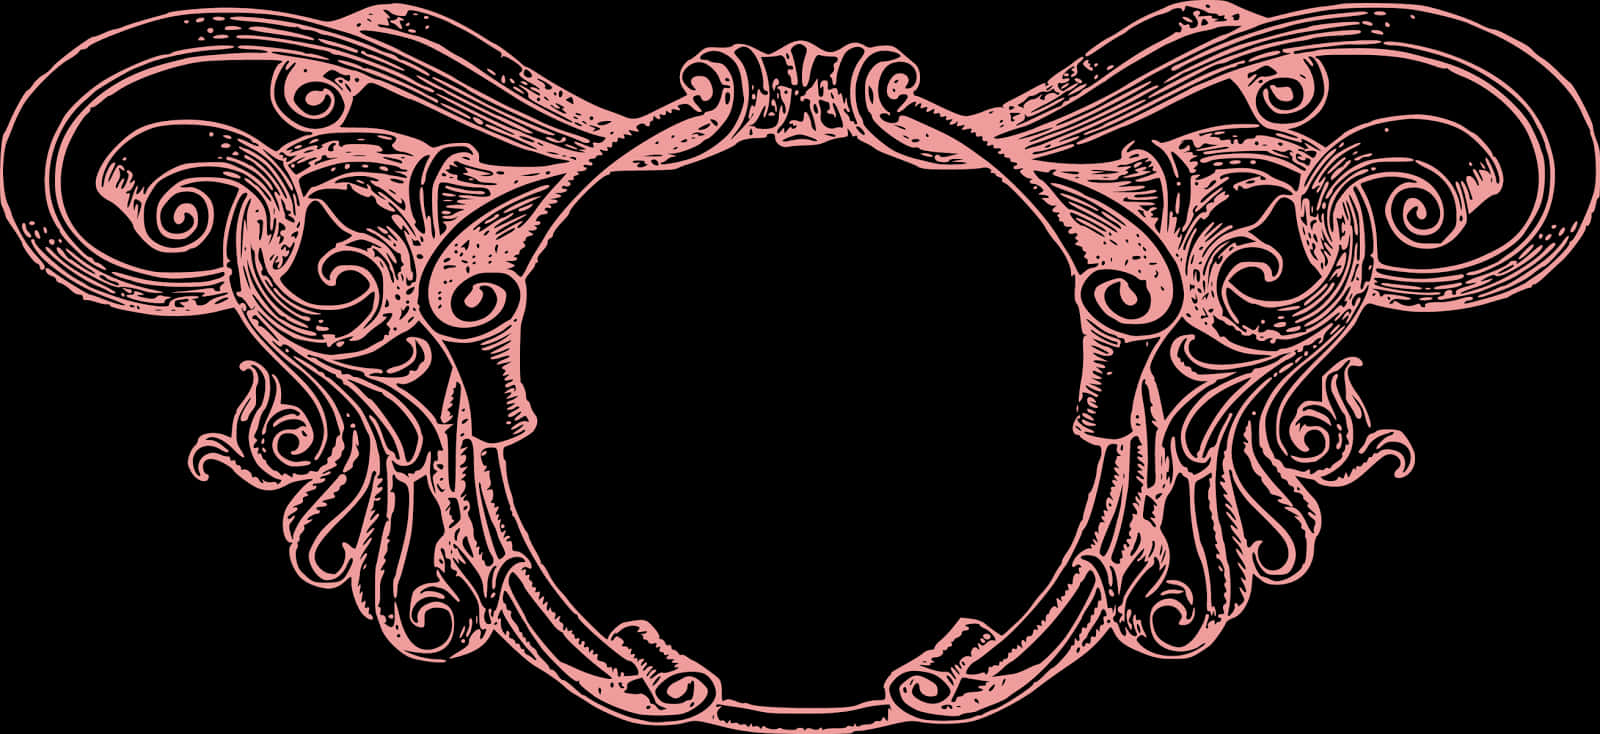 A Pink Circular Frame With A Black Background